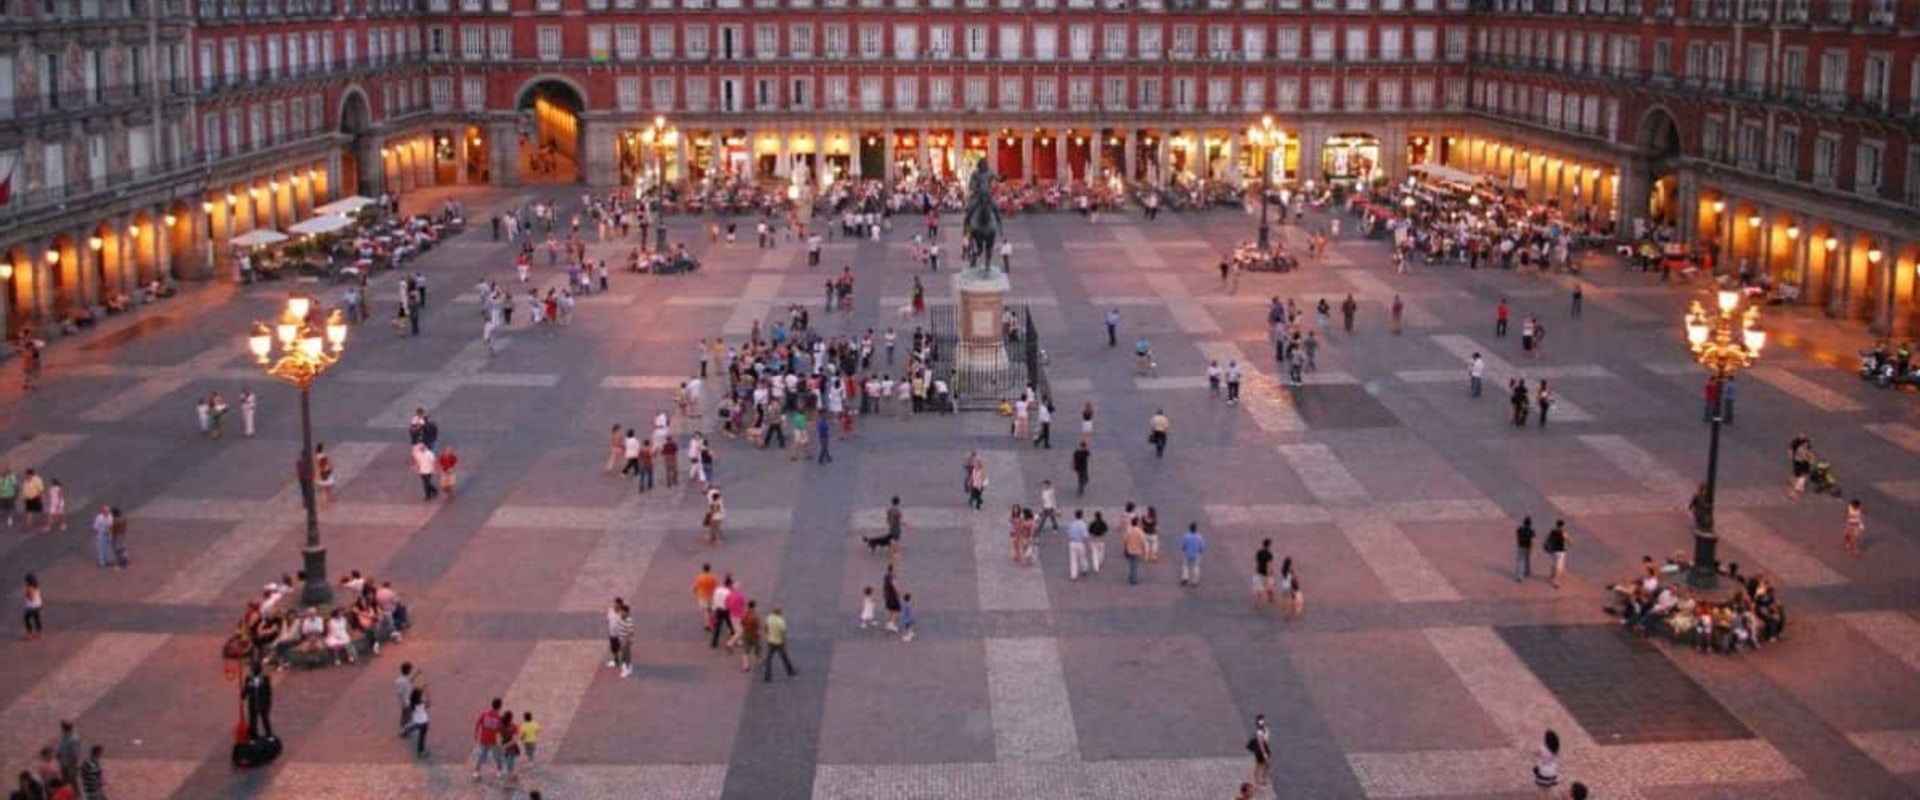 What is the number 1 tourist attraction in spain?